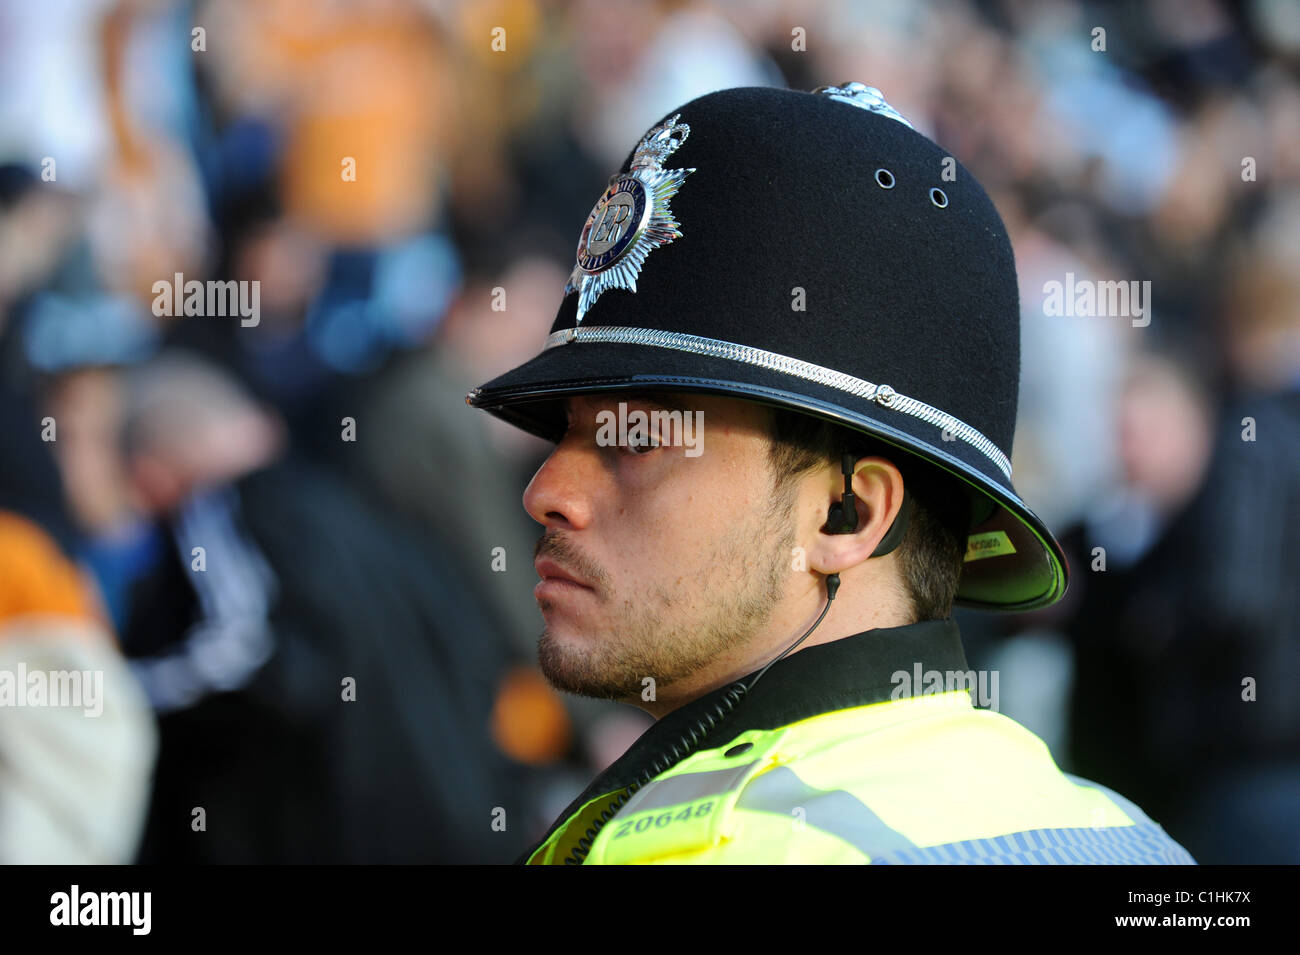 British police officer from West Midlands Police Stock Photo